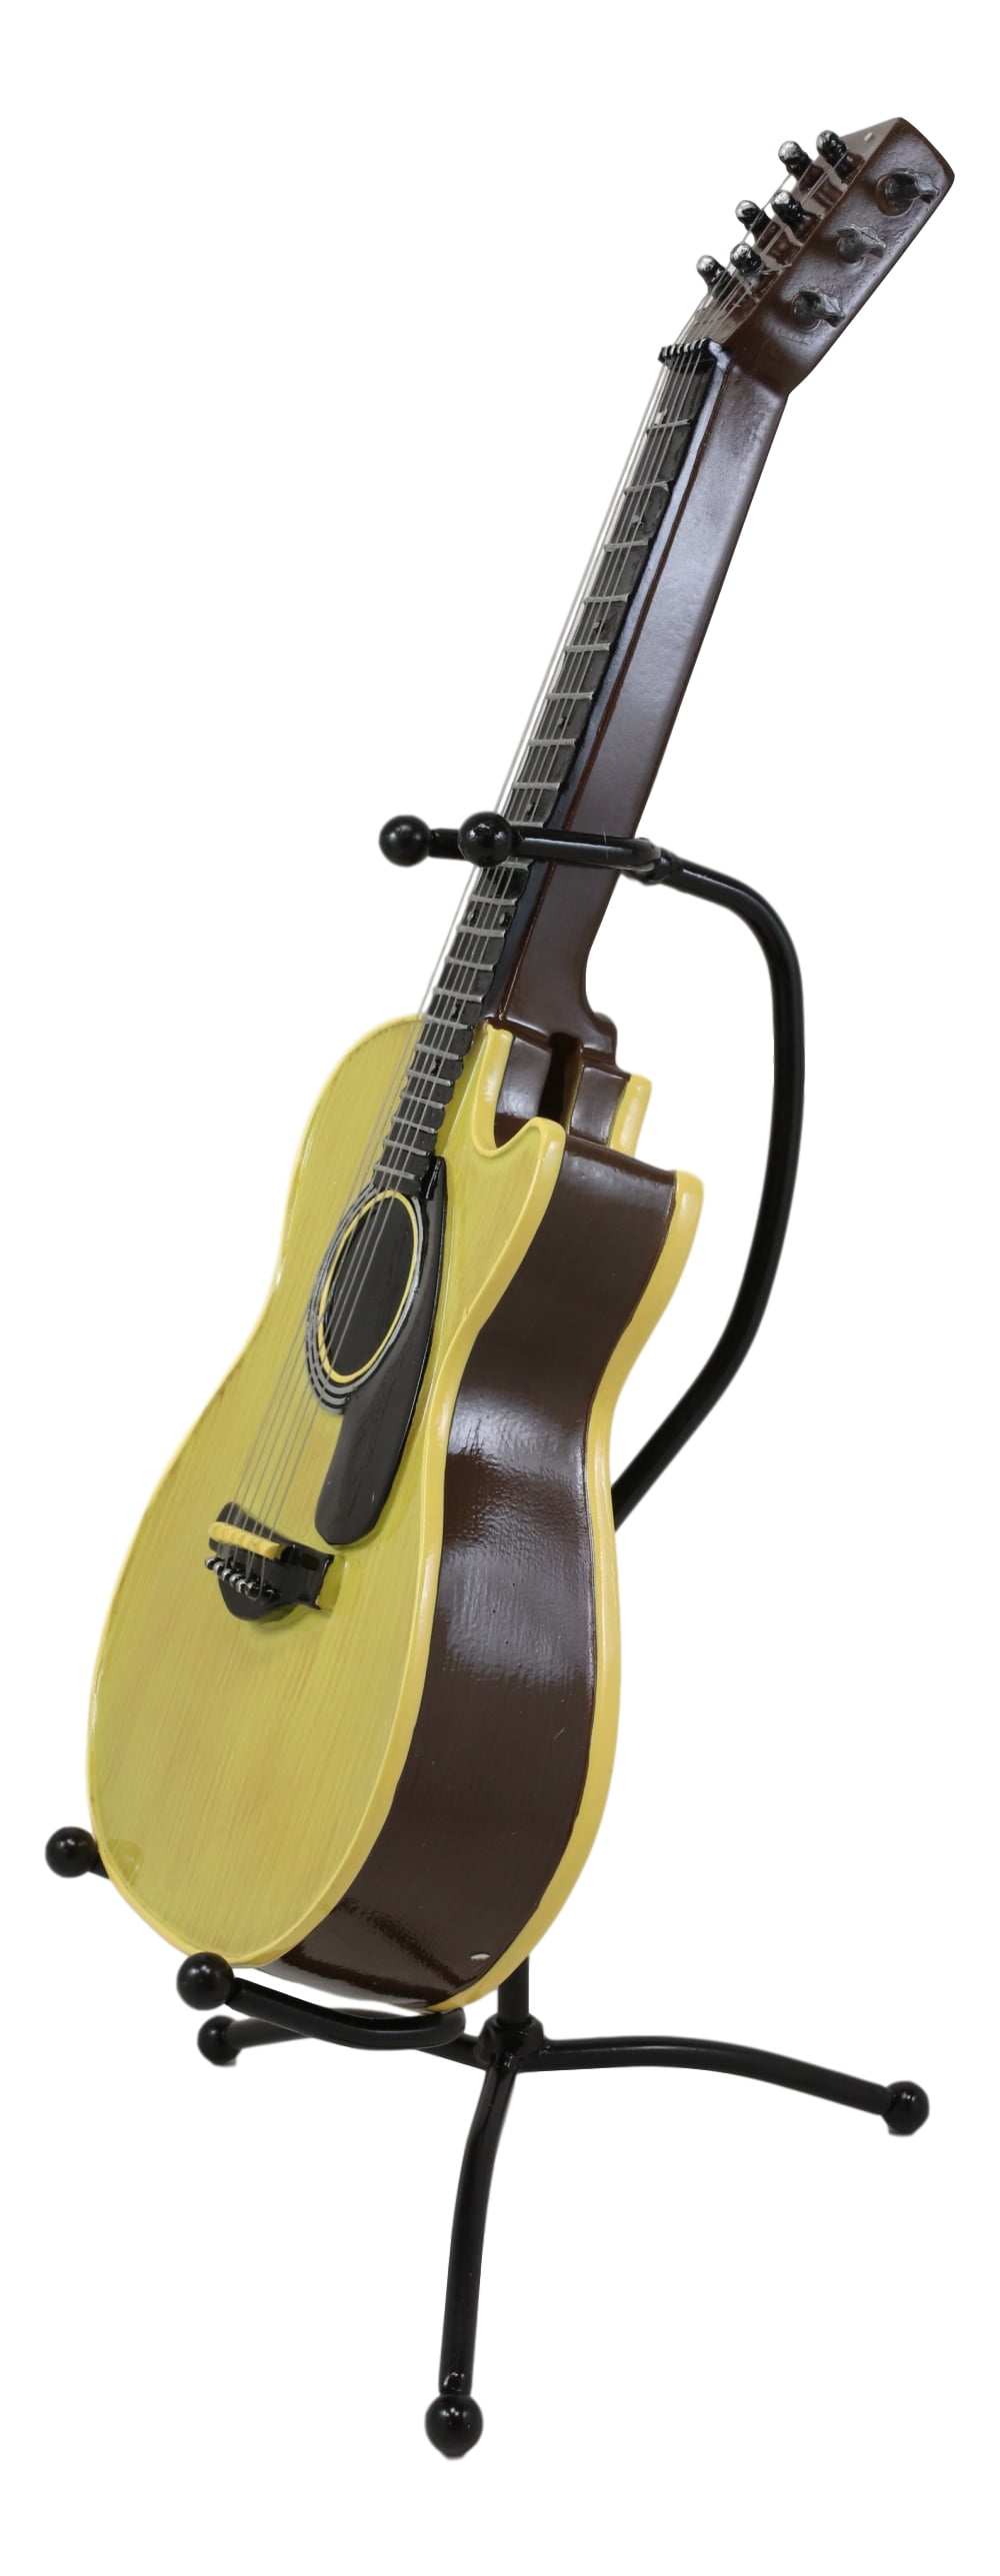 14" New ACOUSTIC Western GUITAR Savings Piggy Coin BANK w/ Stand FREE SHIPPING! 